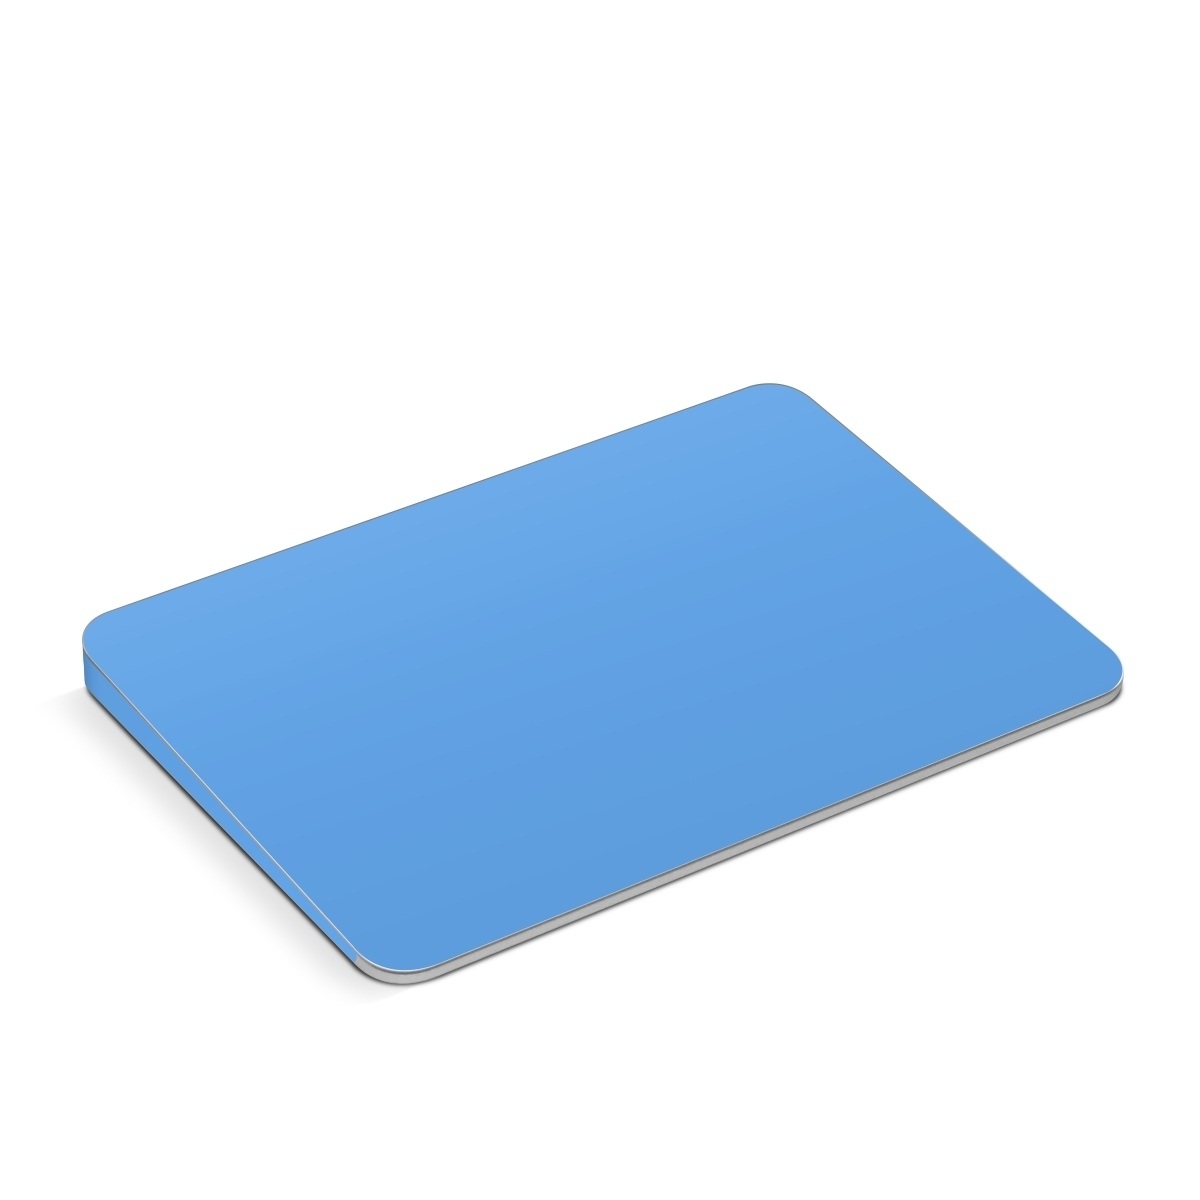 Customized - Apple Magic Trackpad 2 Skins at Rs 599.00